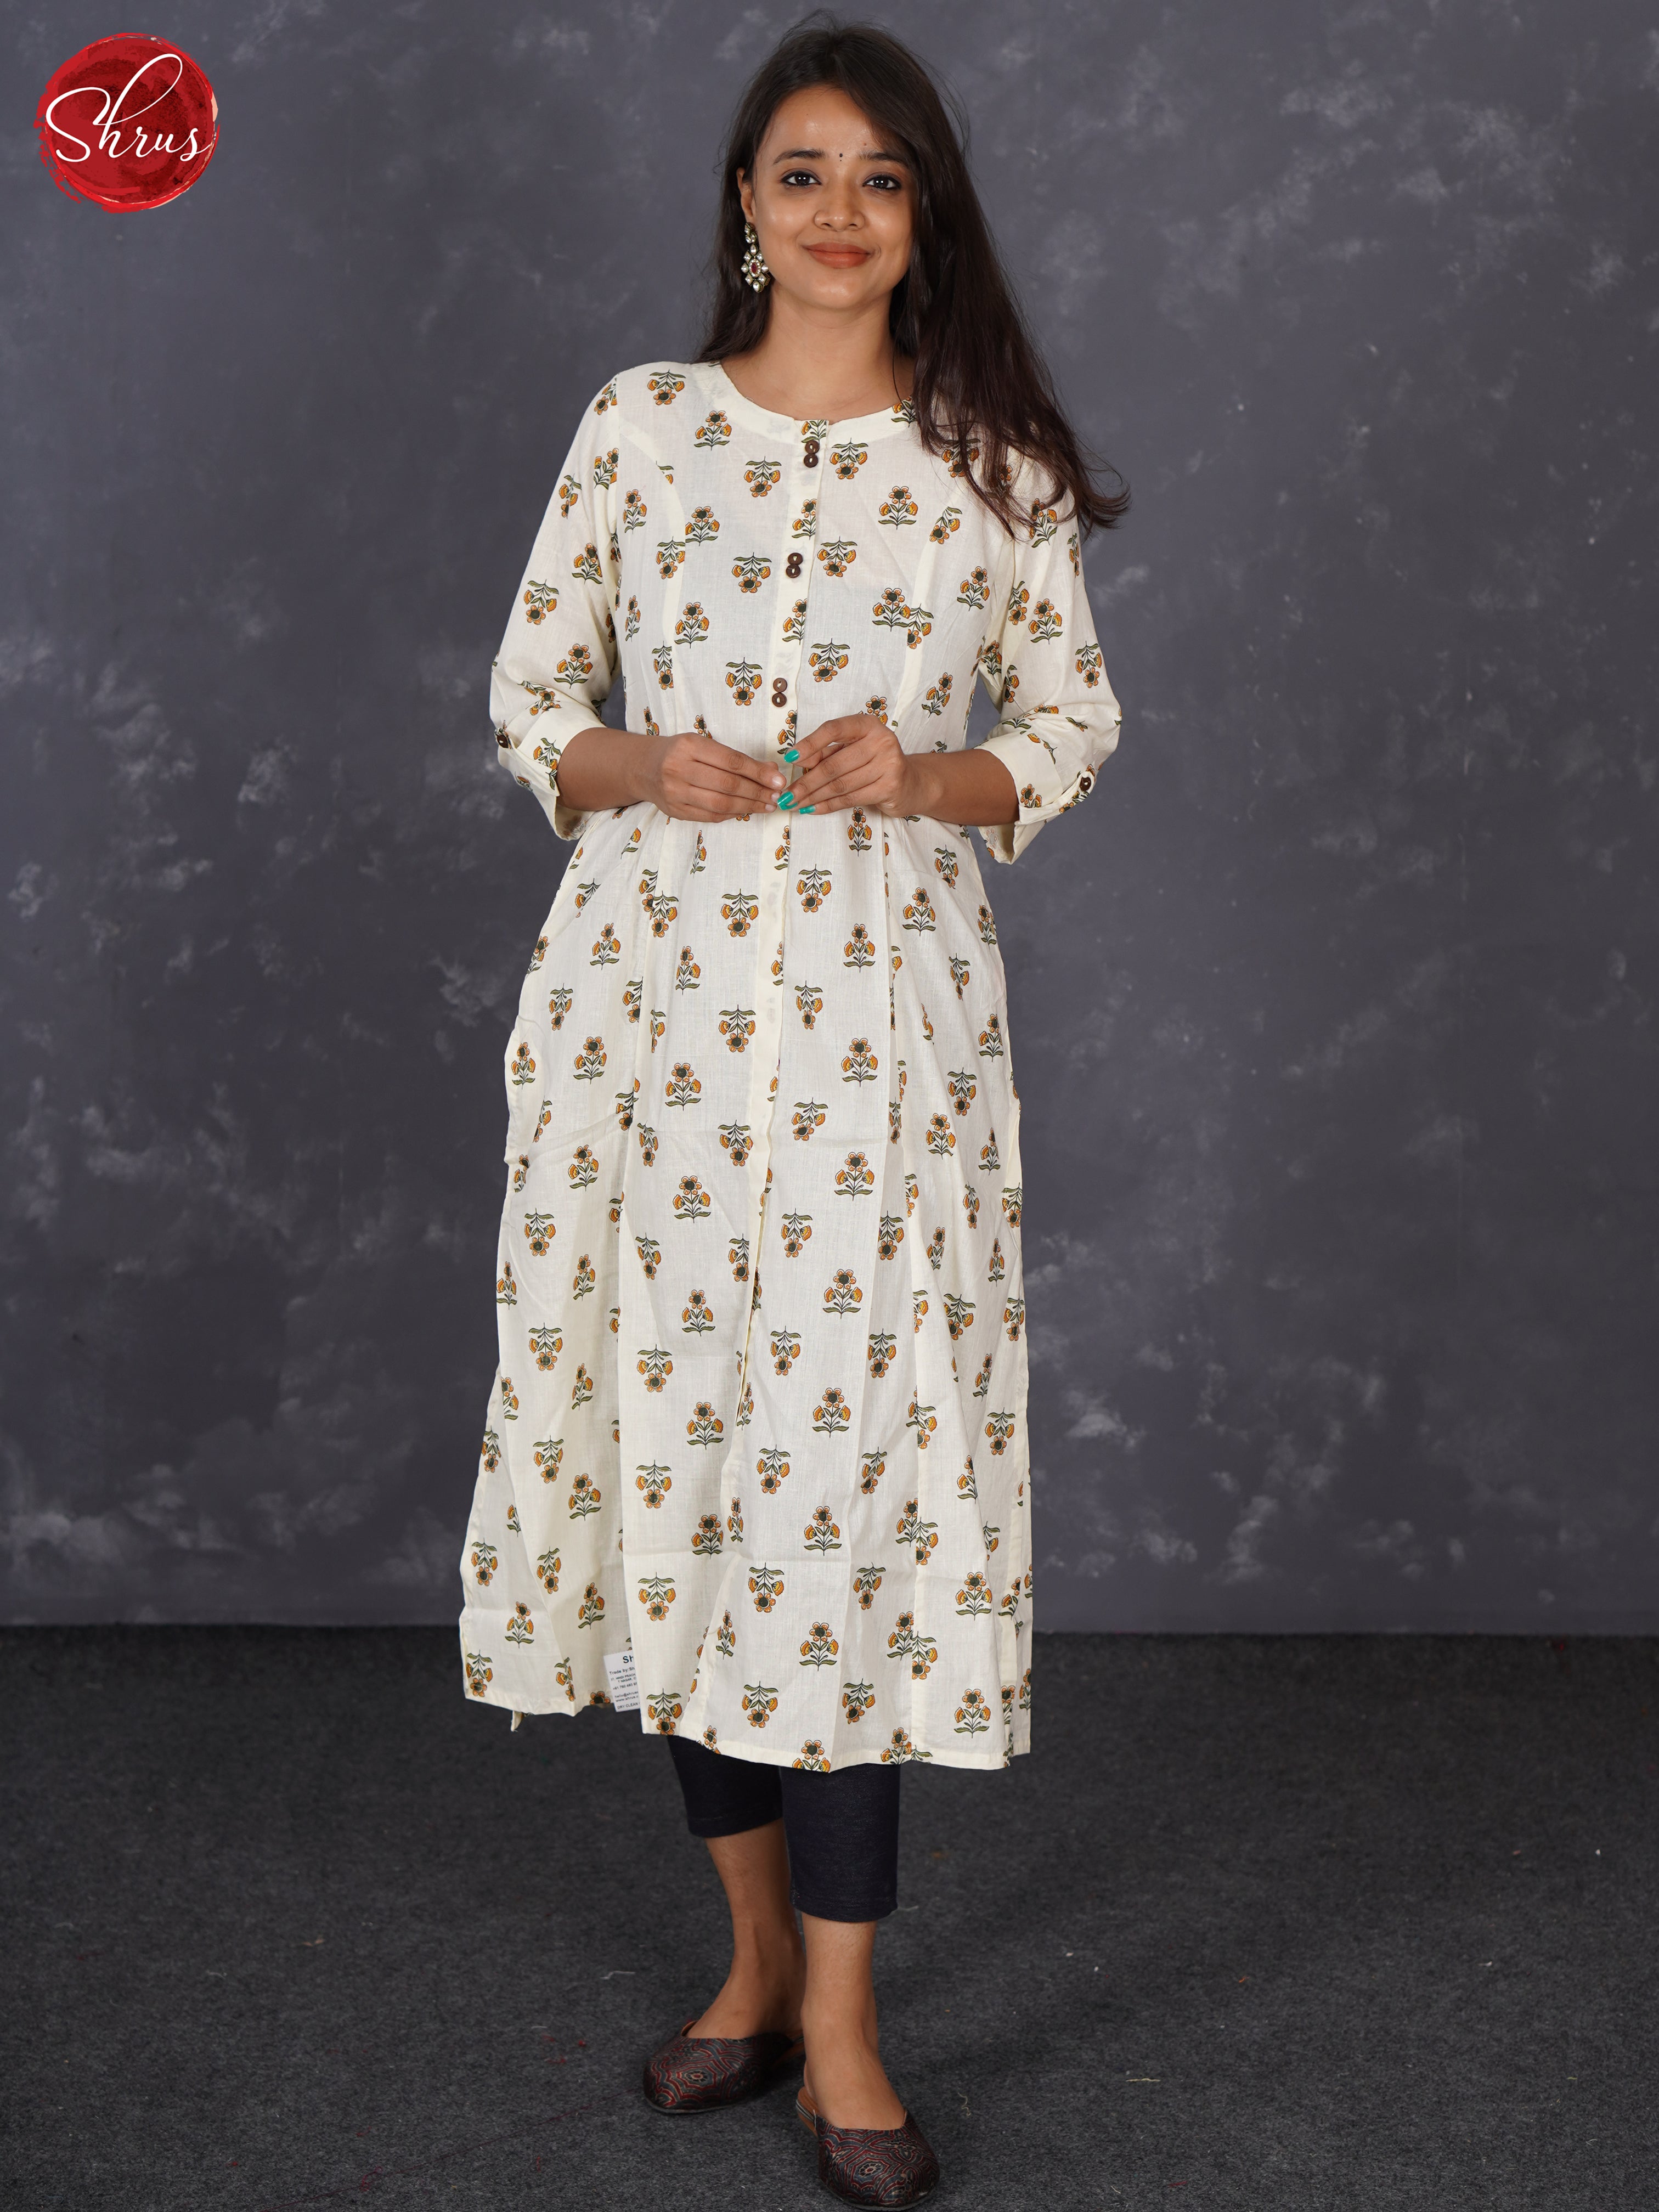 White - Readymade kurti top with floral print - Shop on ShrusEternity.com